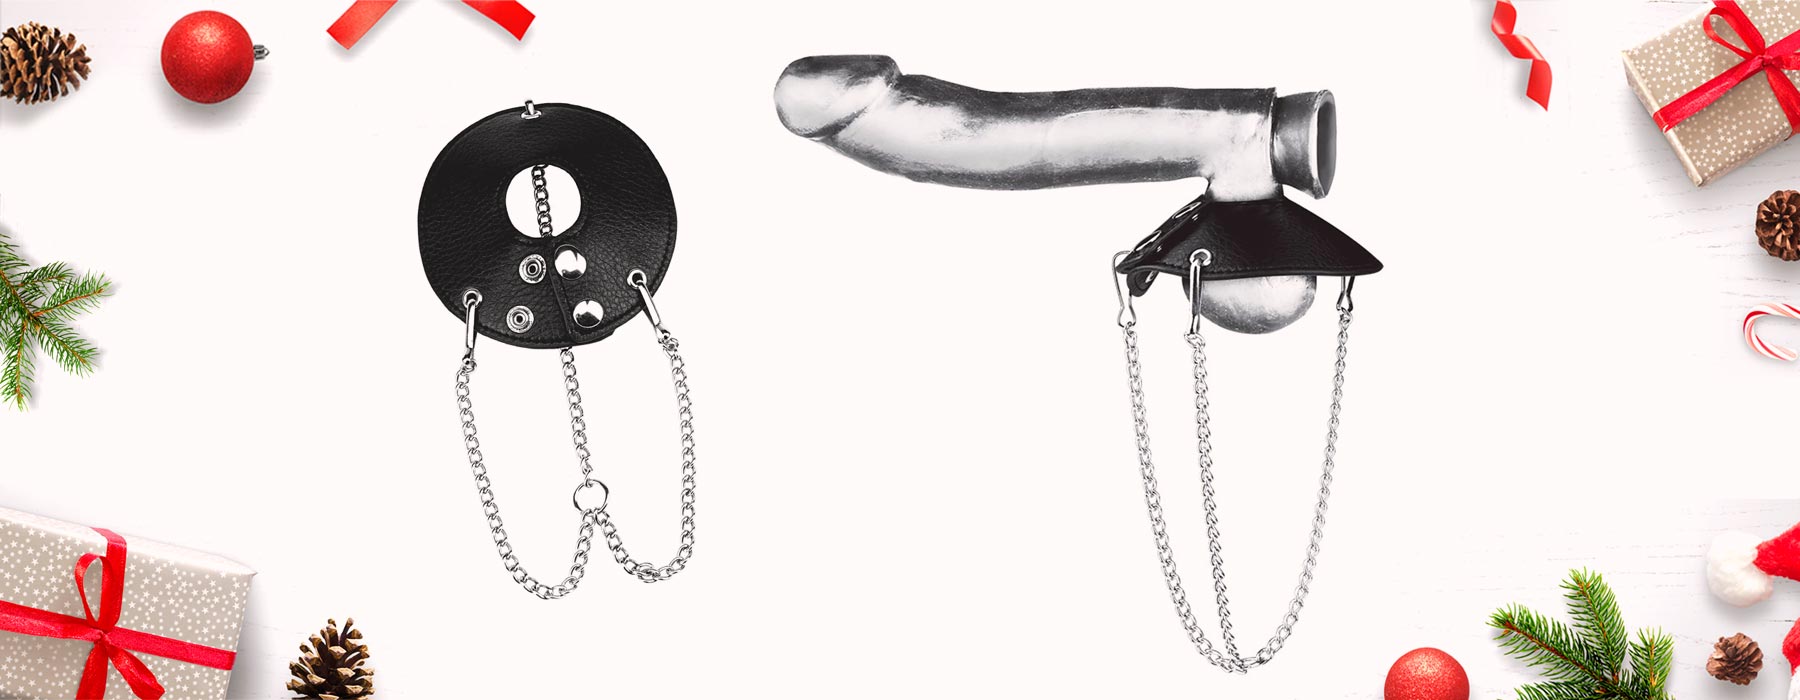 3.5” Parachute Ball Stretcher by Lux Fetish